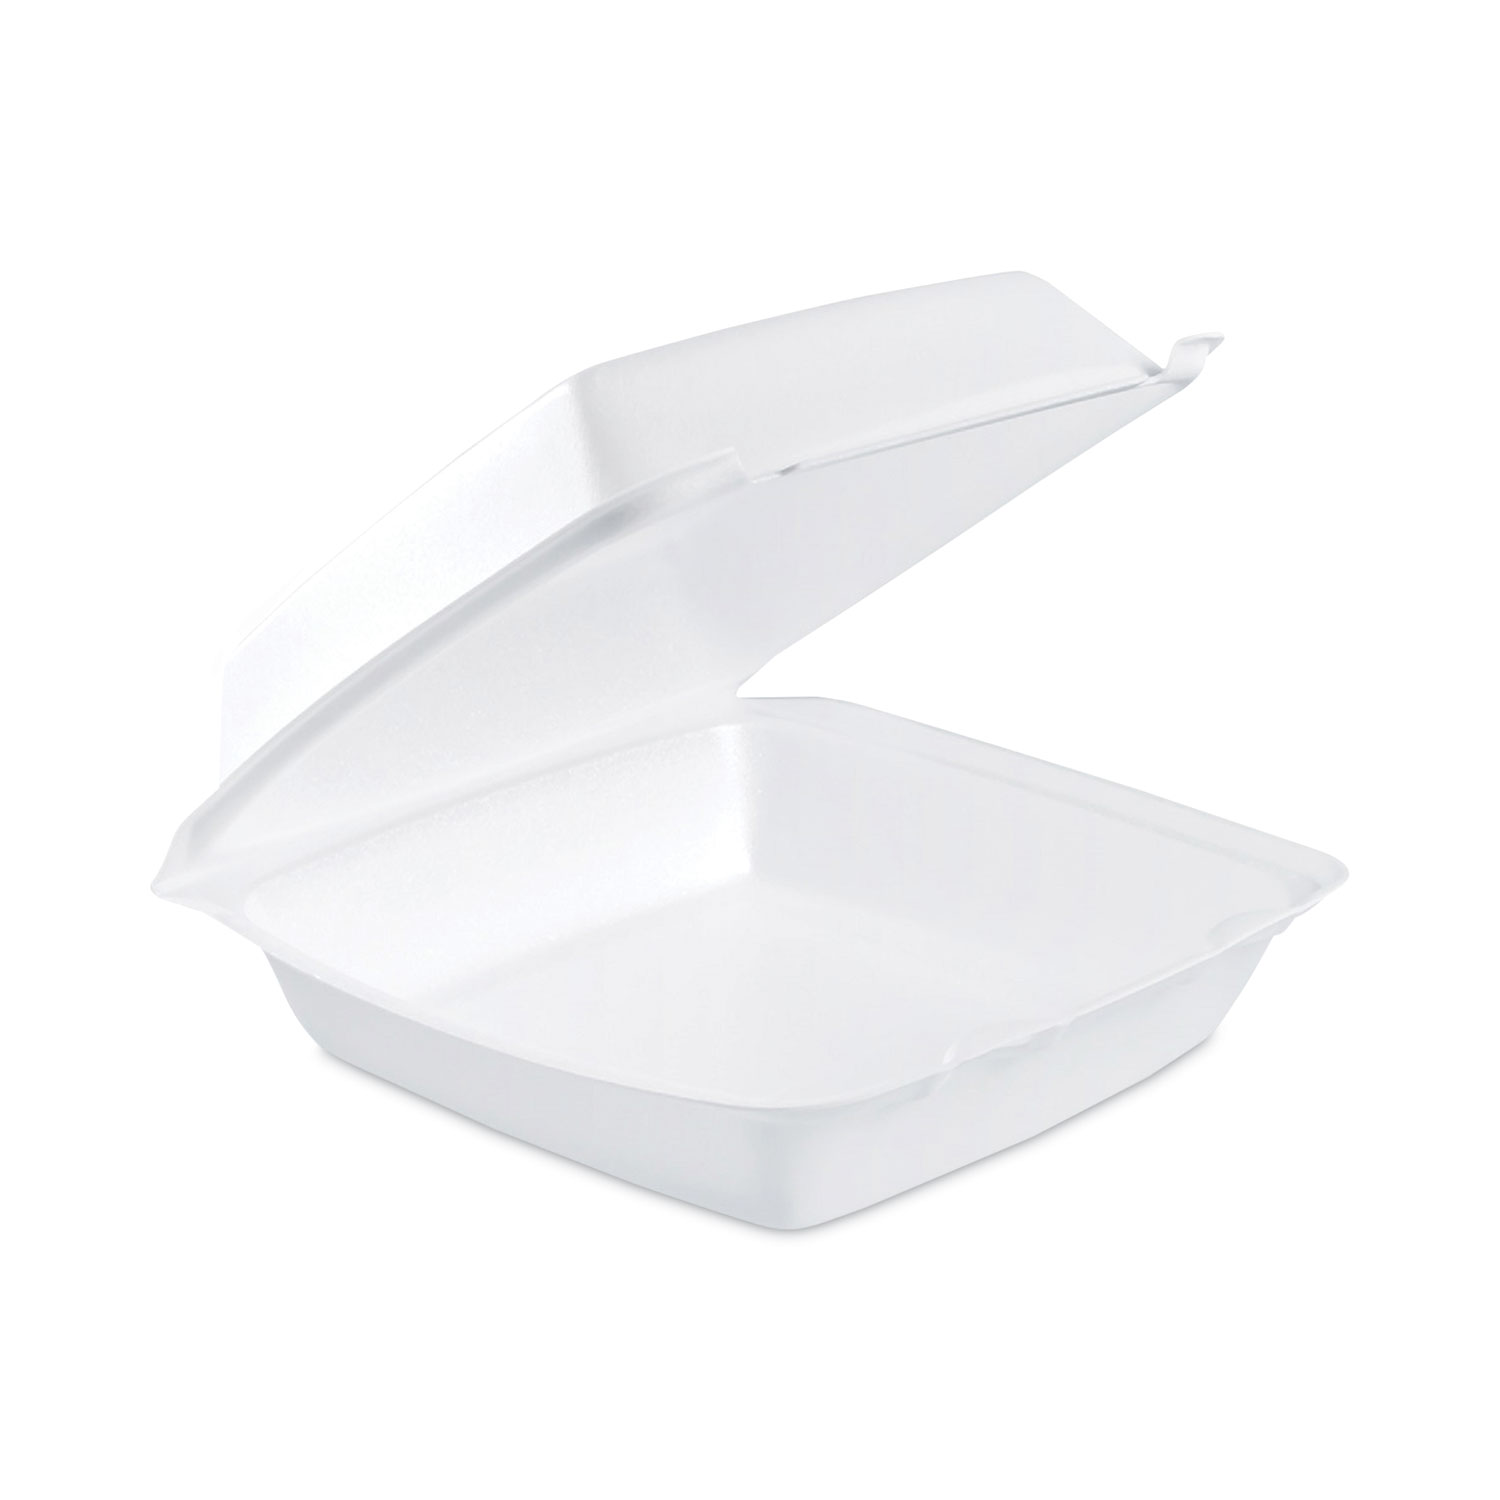 Shop 8 oz Deli Containers - 500 ct at Low Price with Fast Shipping